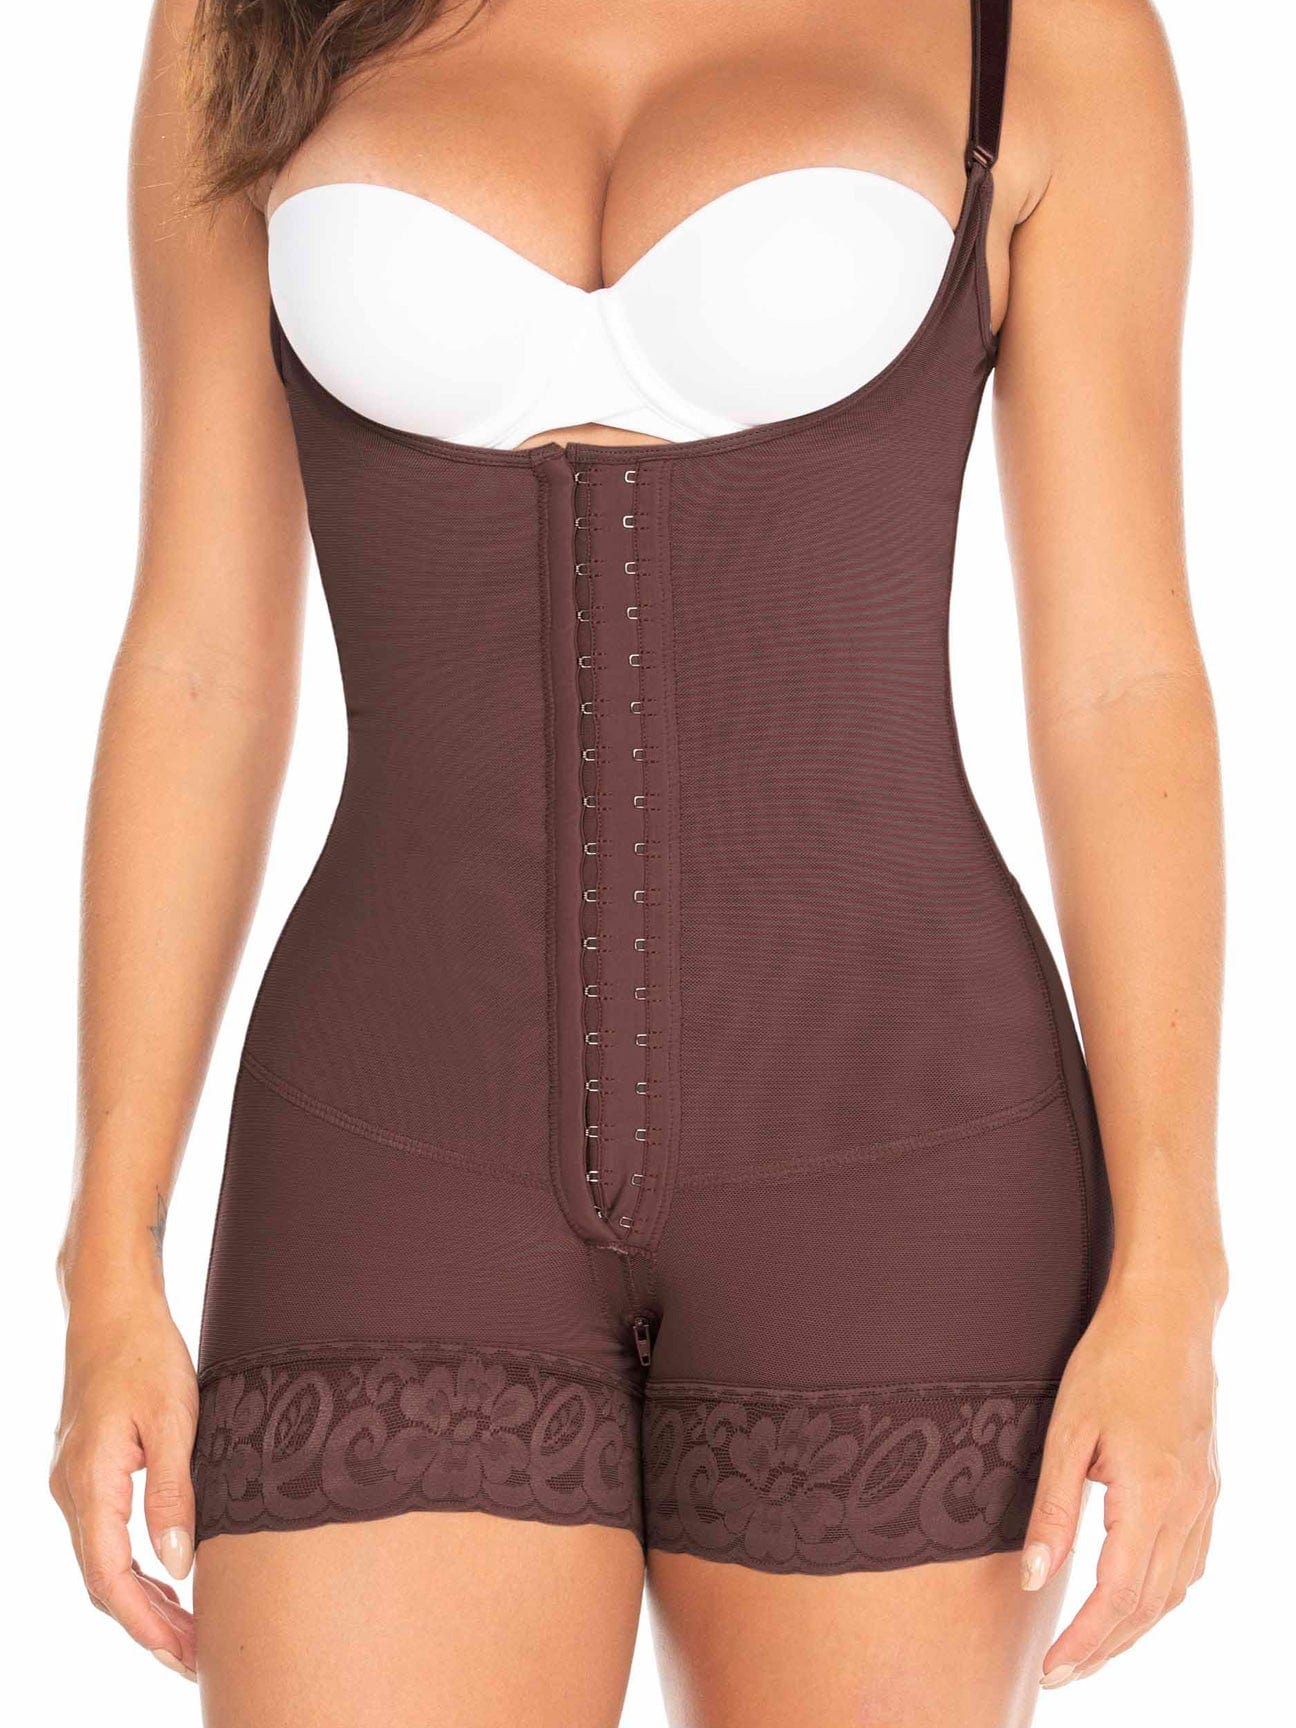 Upper body view of a model wearing a chocolate colored faja with zipper and hooks.